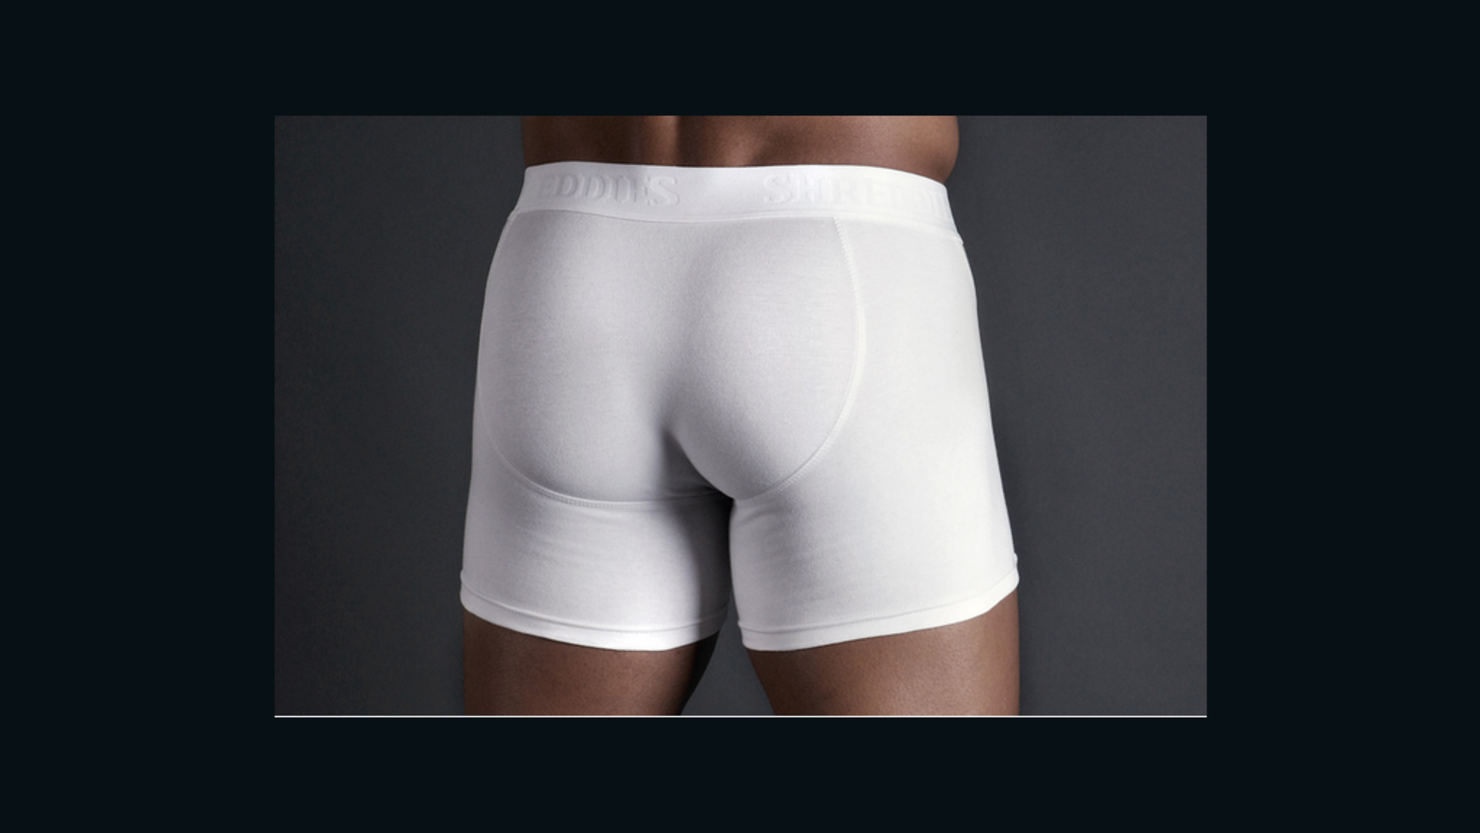 What's a great place to buy men's underwear online? - Quora